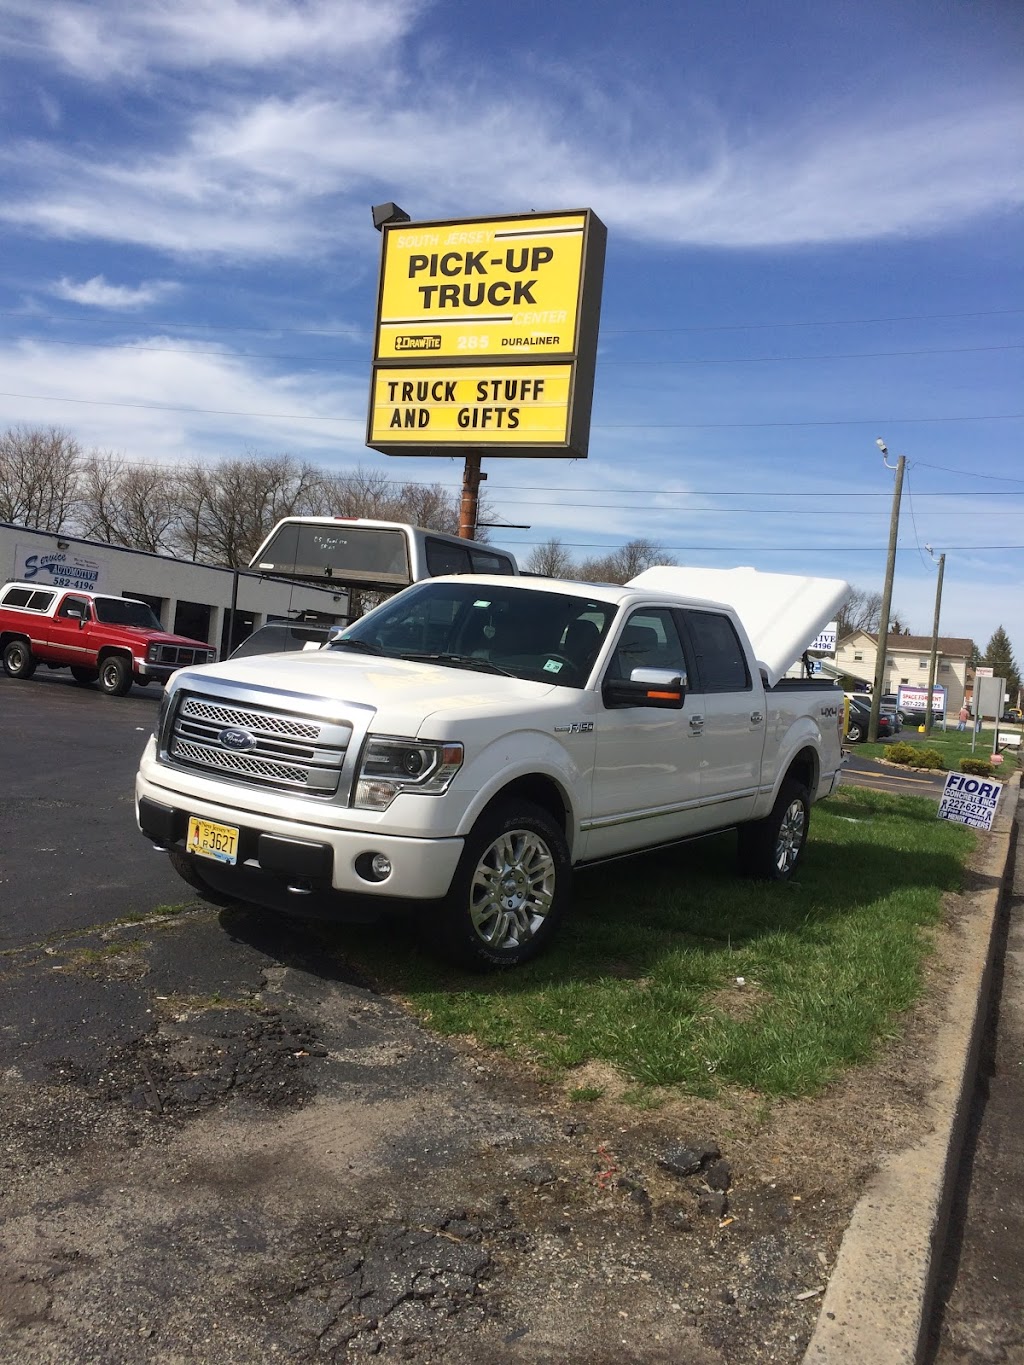 South Jersey Pickup Truck Center | LARGEST IN, METRO AREA, 285 Delsea Dr, Sewell, NJ 08080 | Phone: (856) 582-4700